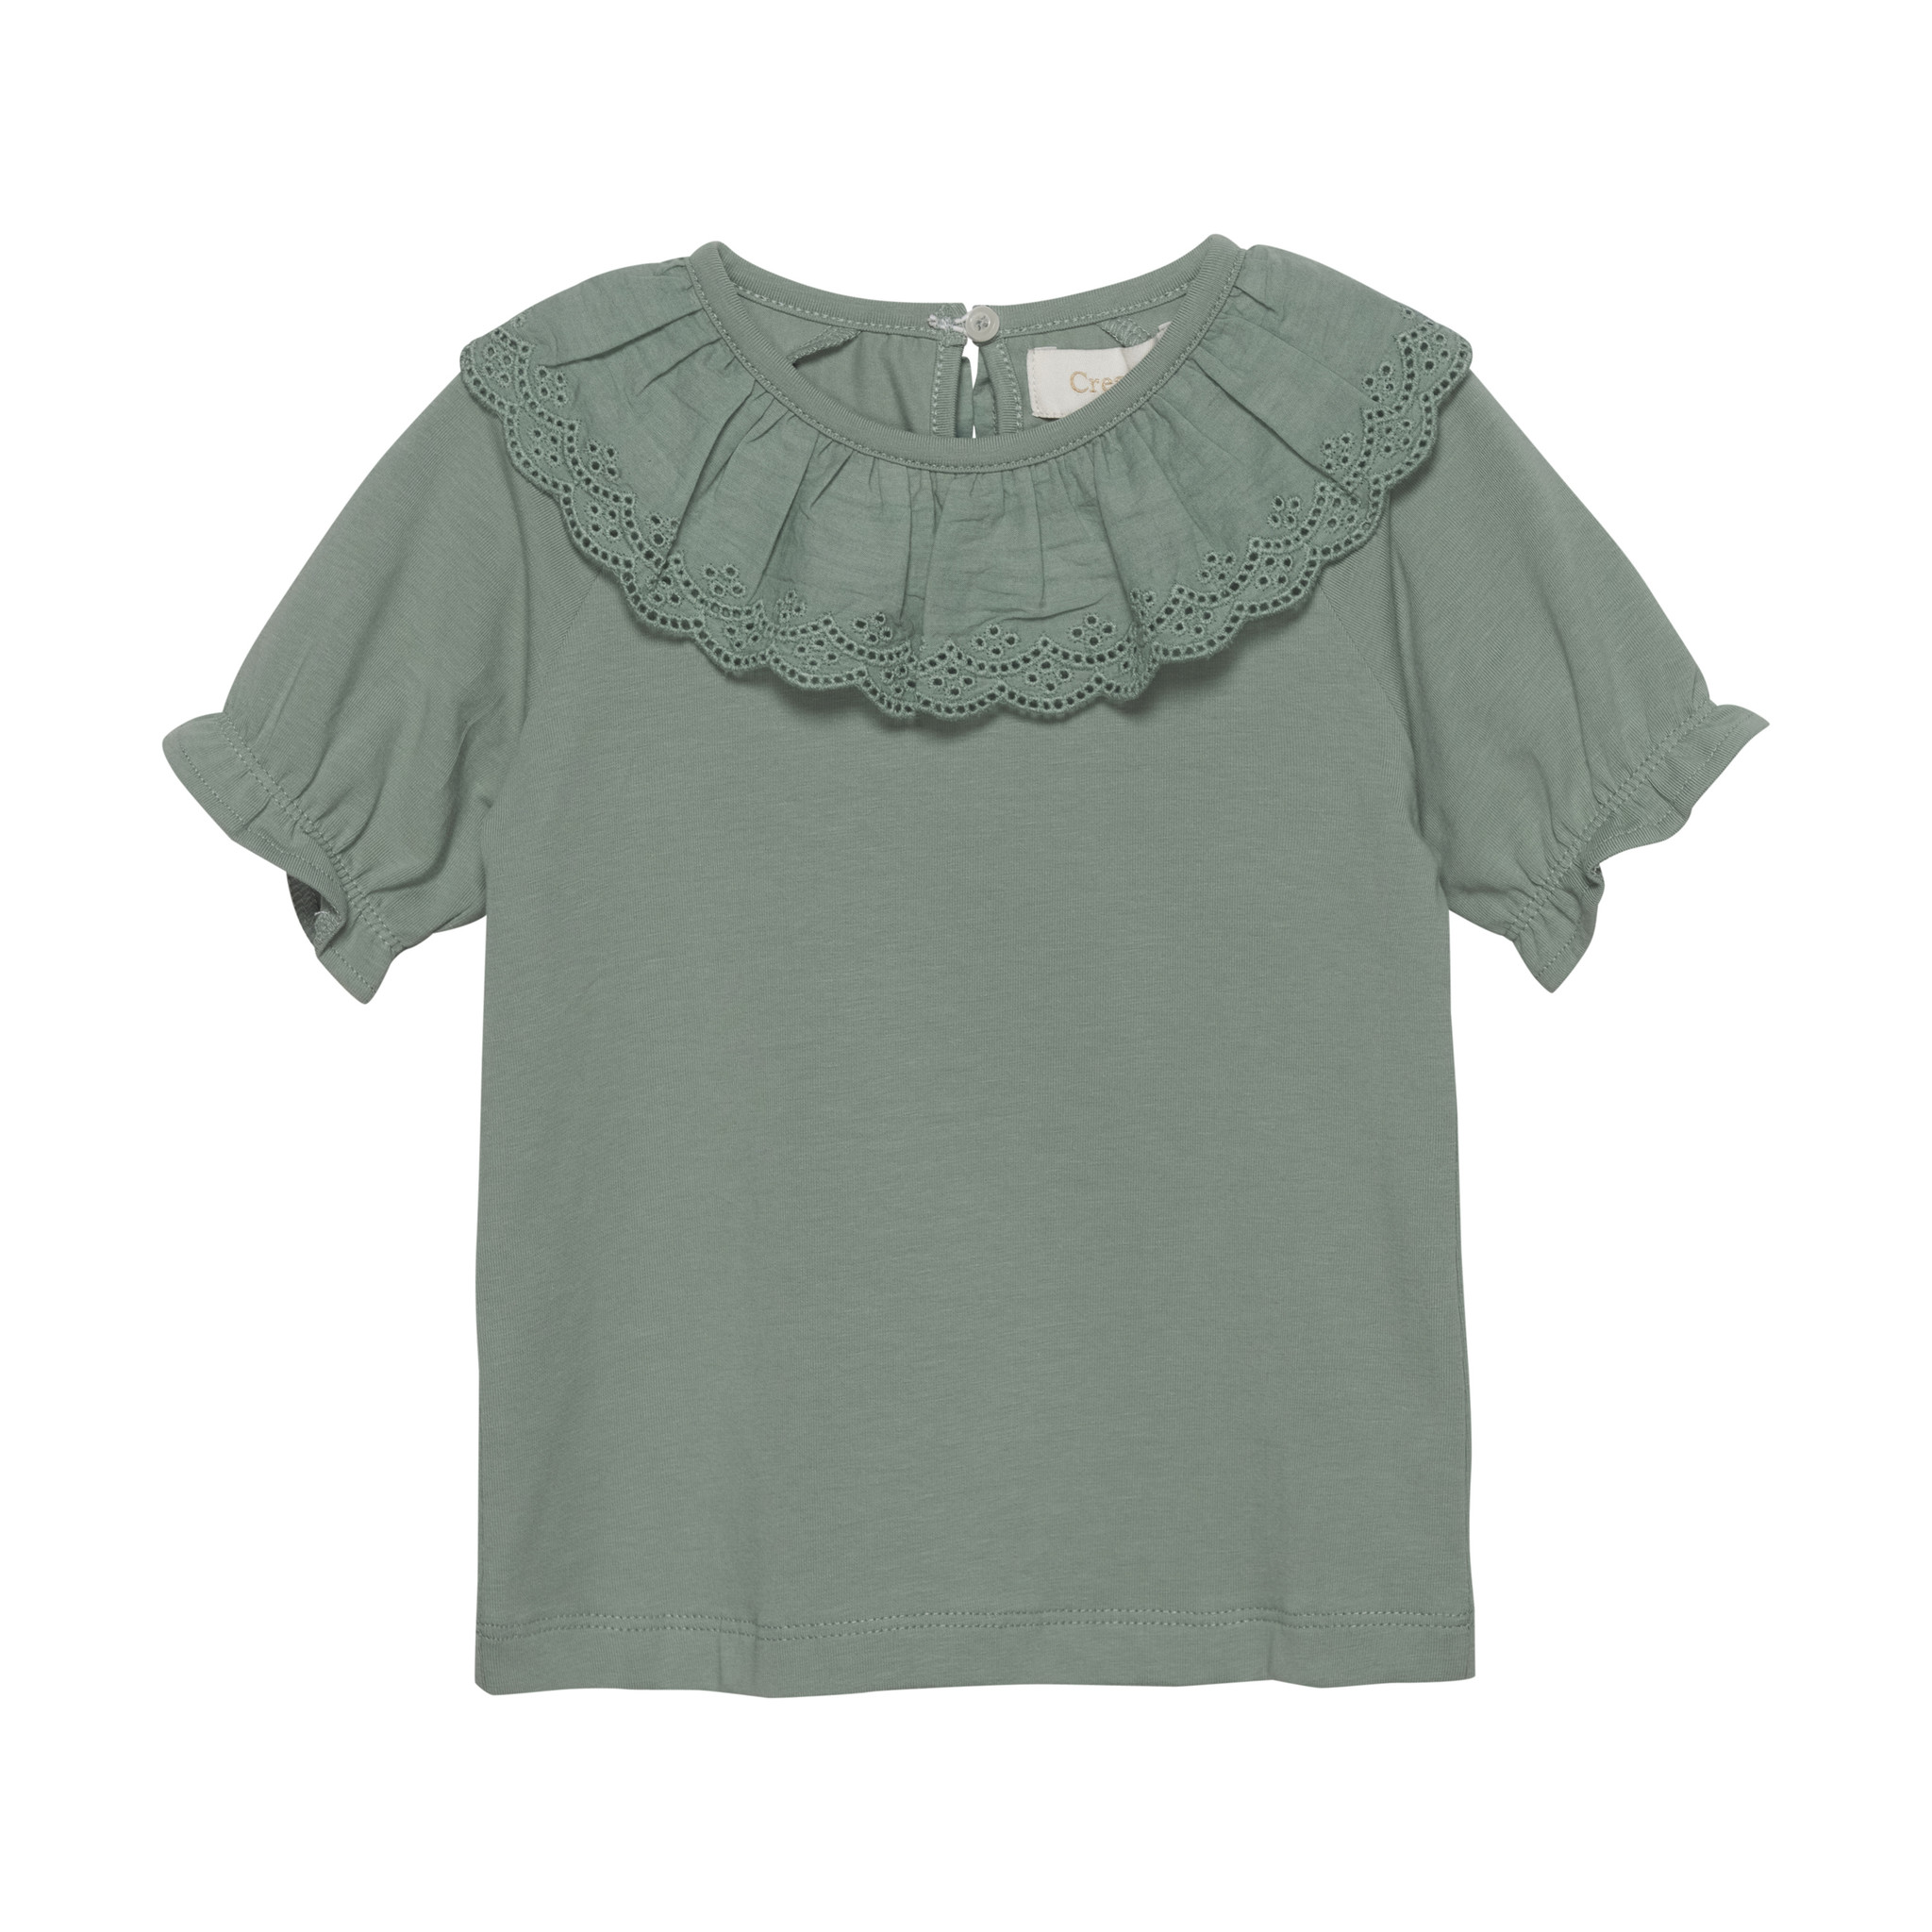 Shirt with Eyelet Collar - Lily Pad